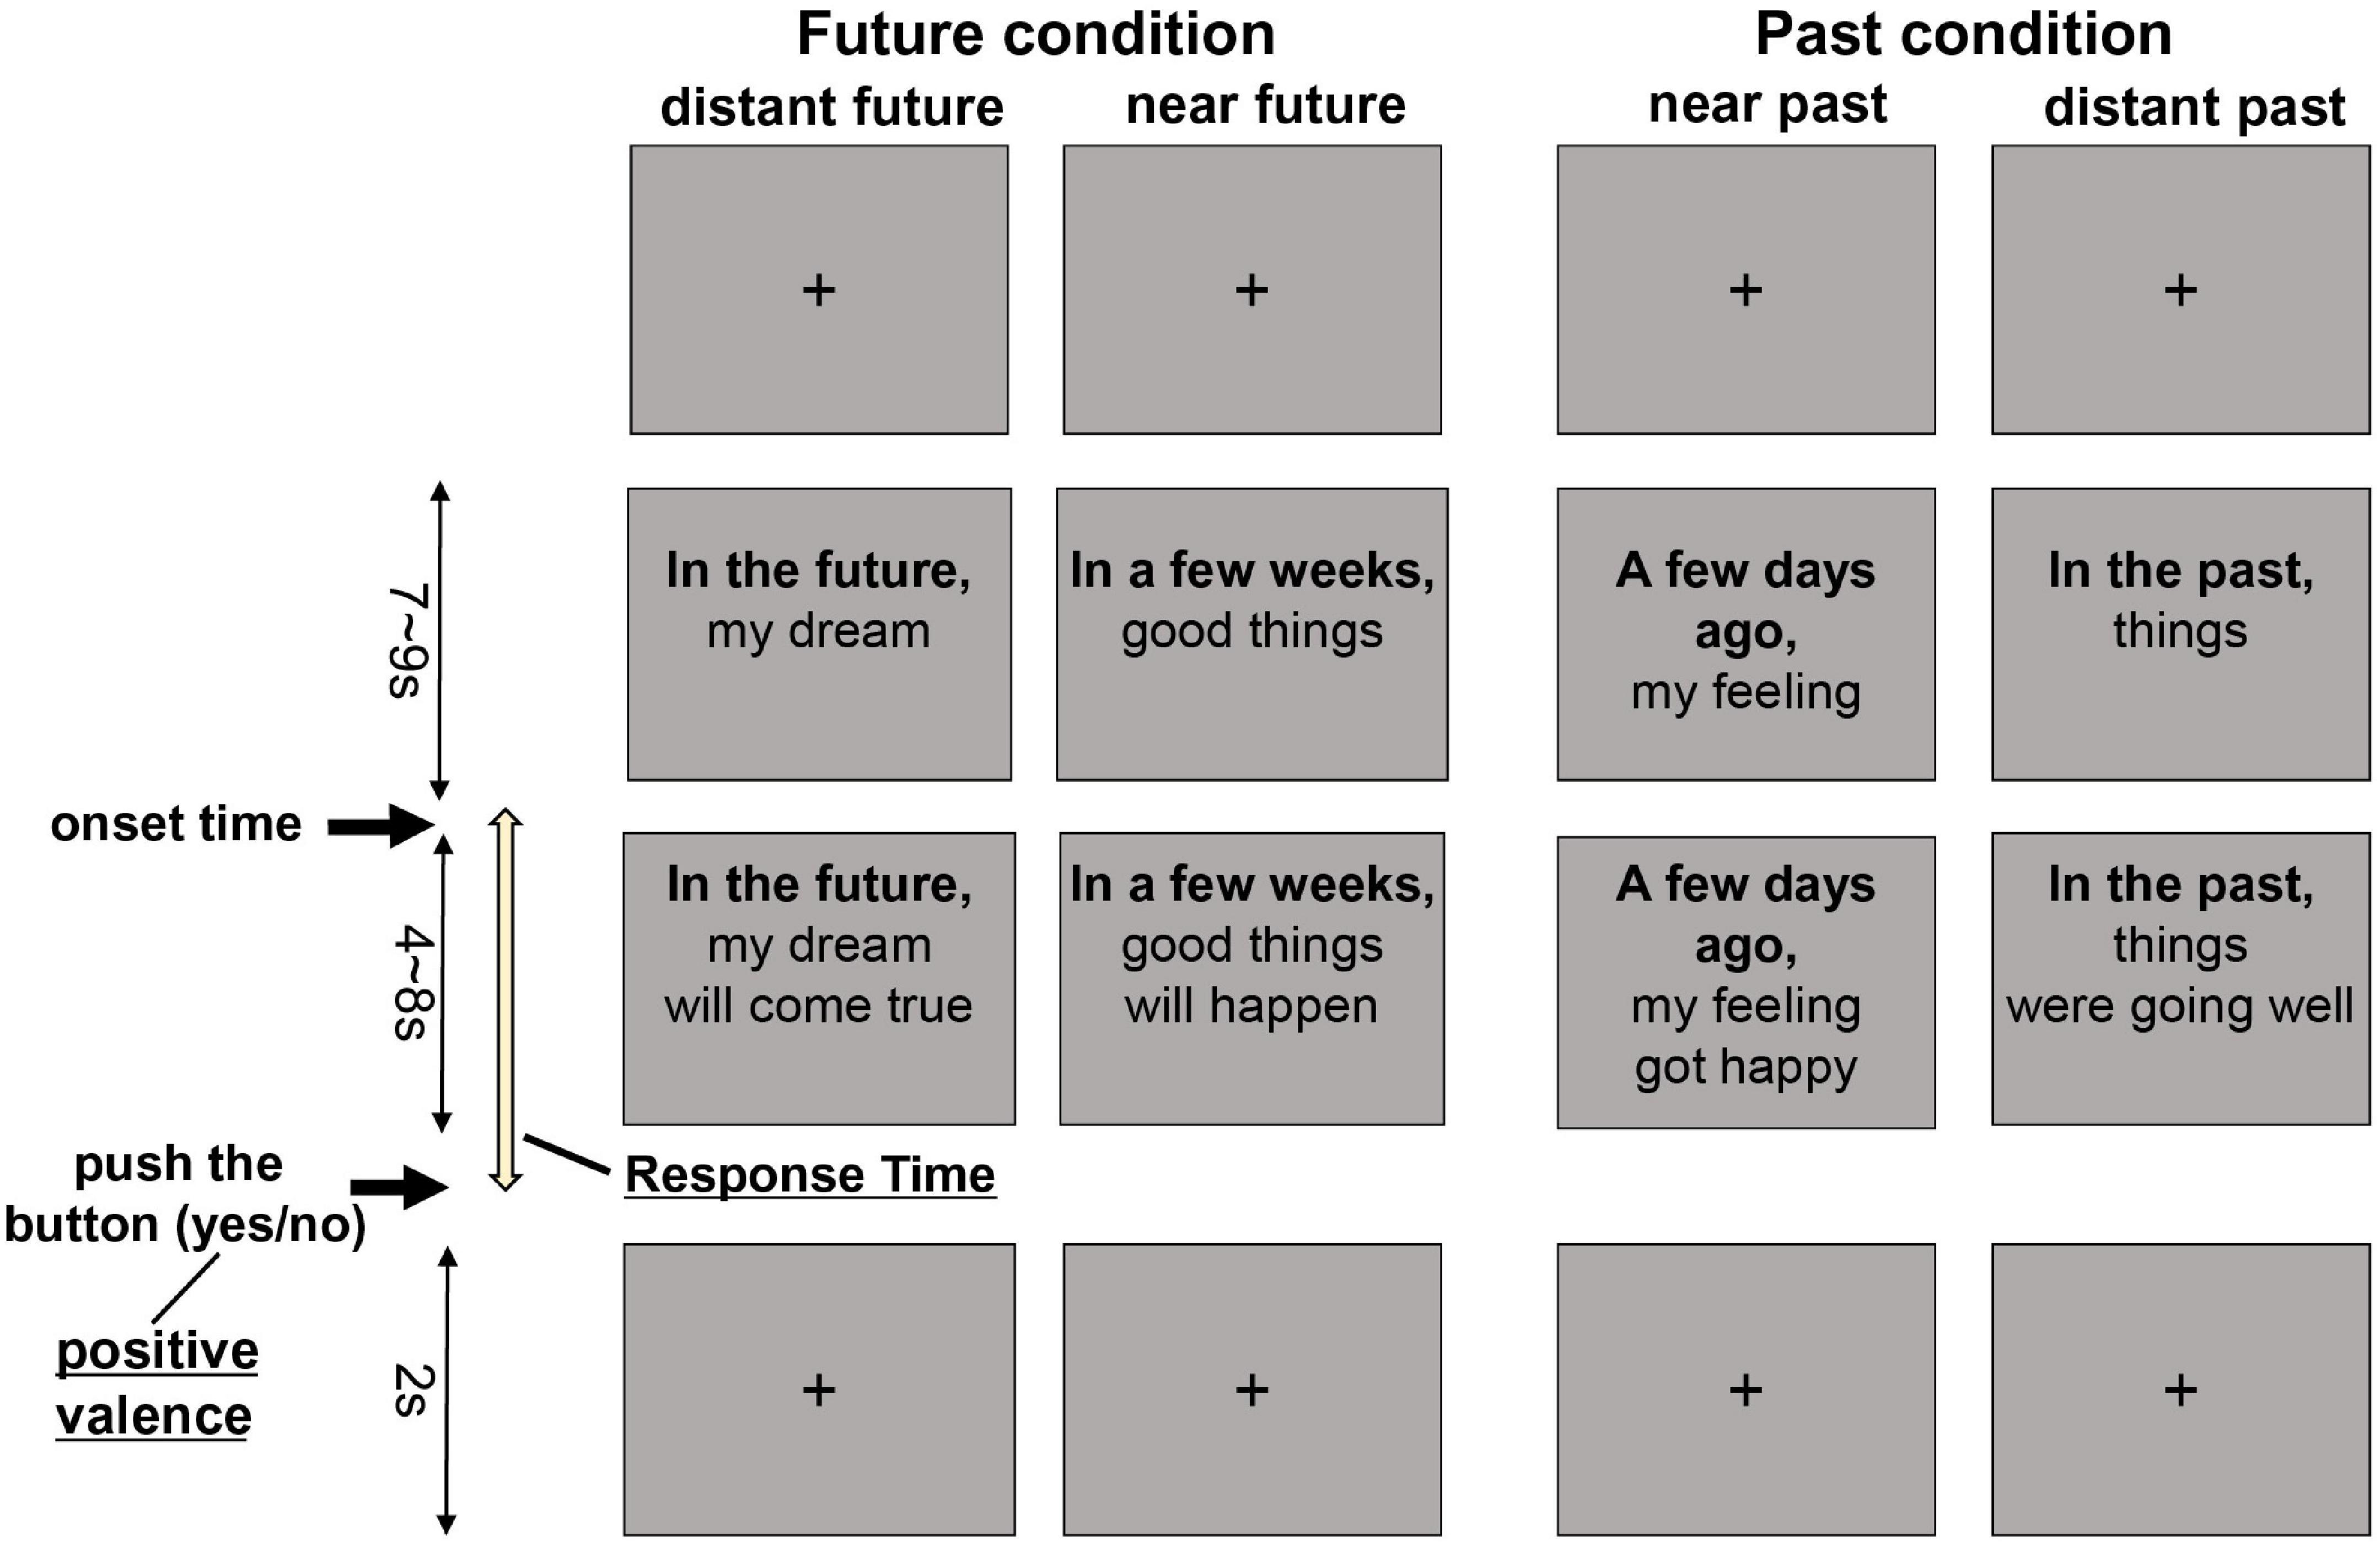 The effect of cognitive behavioral therapy on future thinking in patients with major depressive disorder: A randomized controlled trial